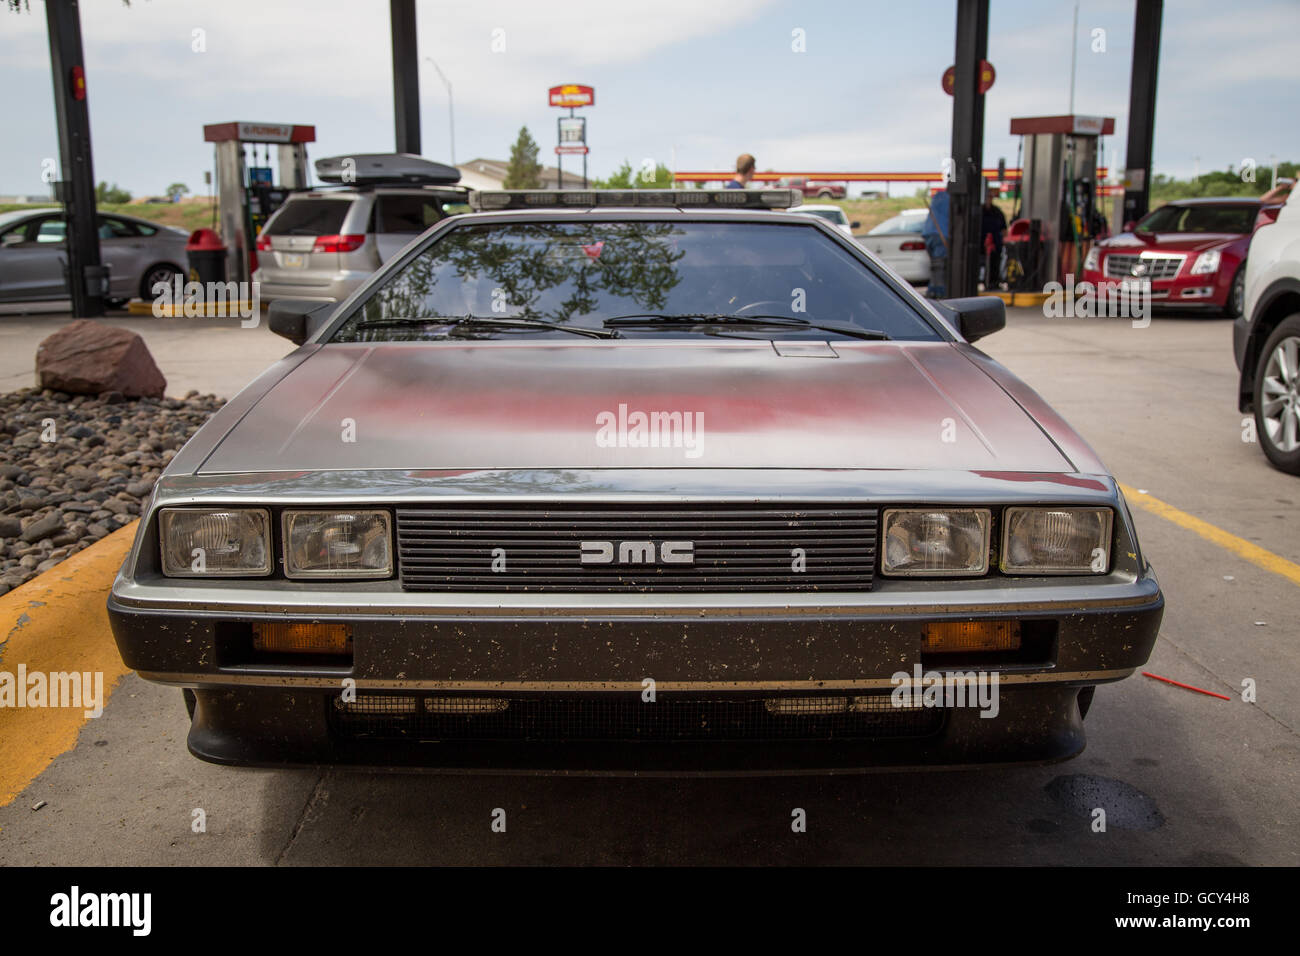 A De Lorean car is parked in front of a gas station in Big Springs, Nebraska, June 1, 2014. Stock Photo